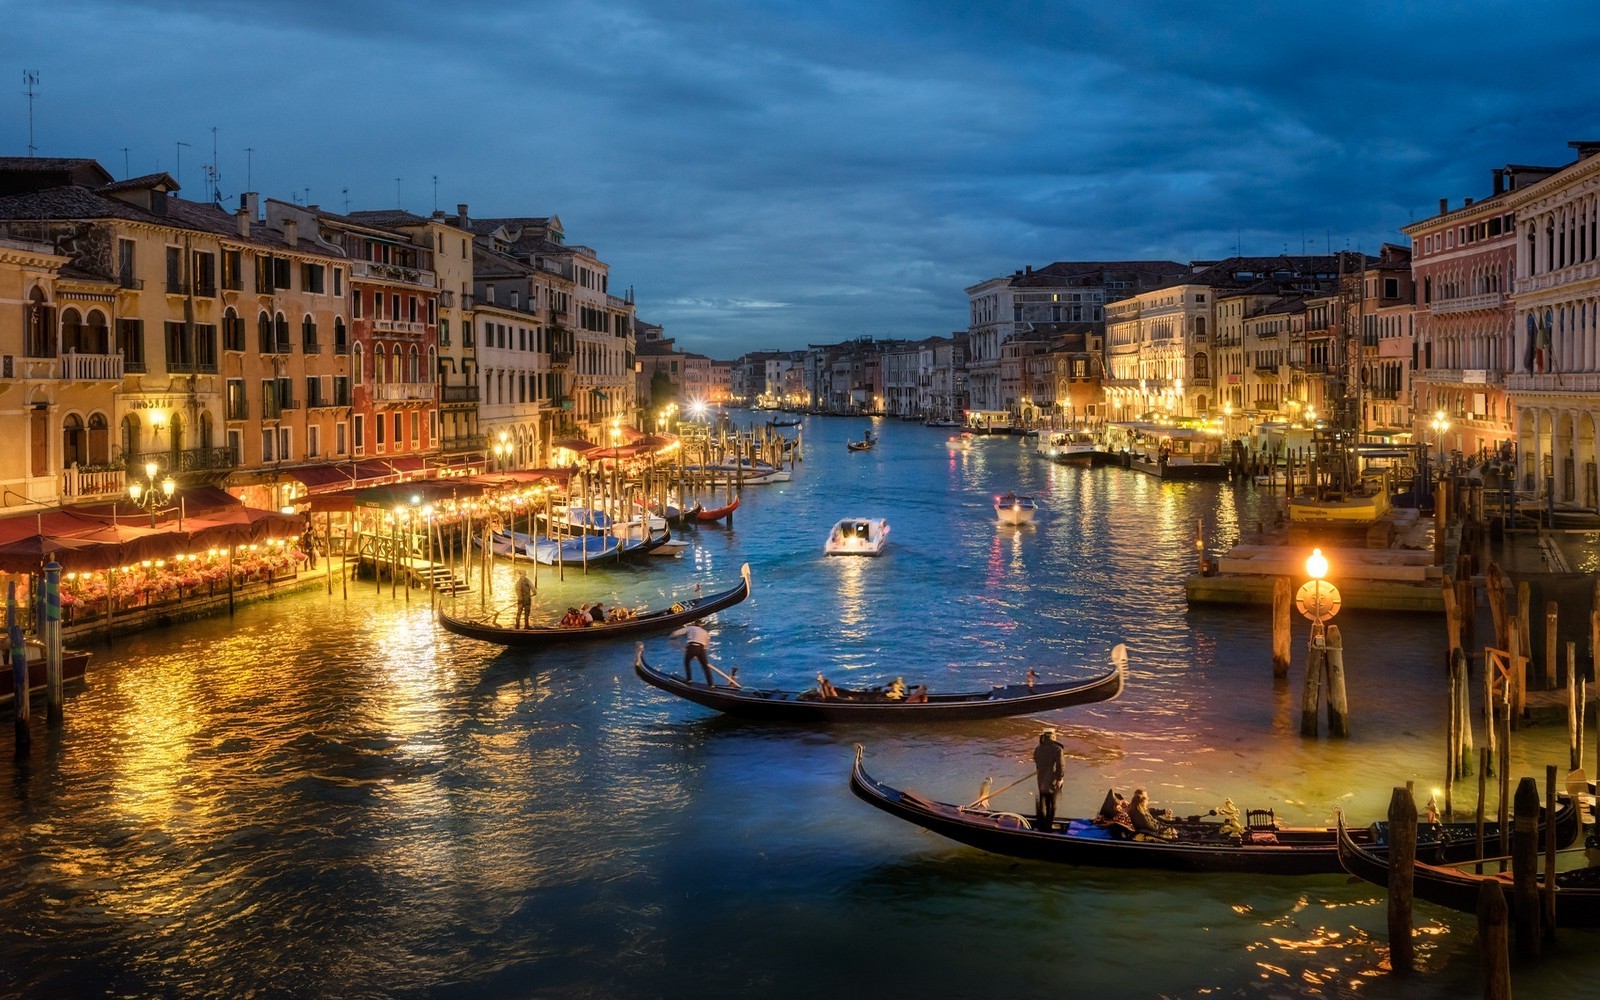 photography, Urban, Landscape, Architecture, Canal, Sea, Gondolas, Lights, Old Building, Evening, Venice, Italy Wallpaper